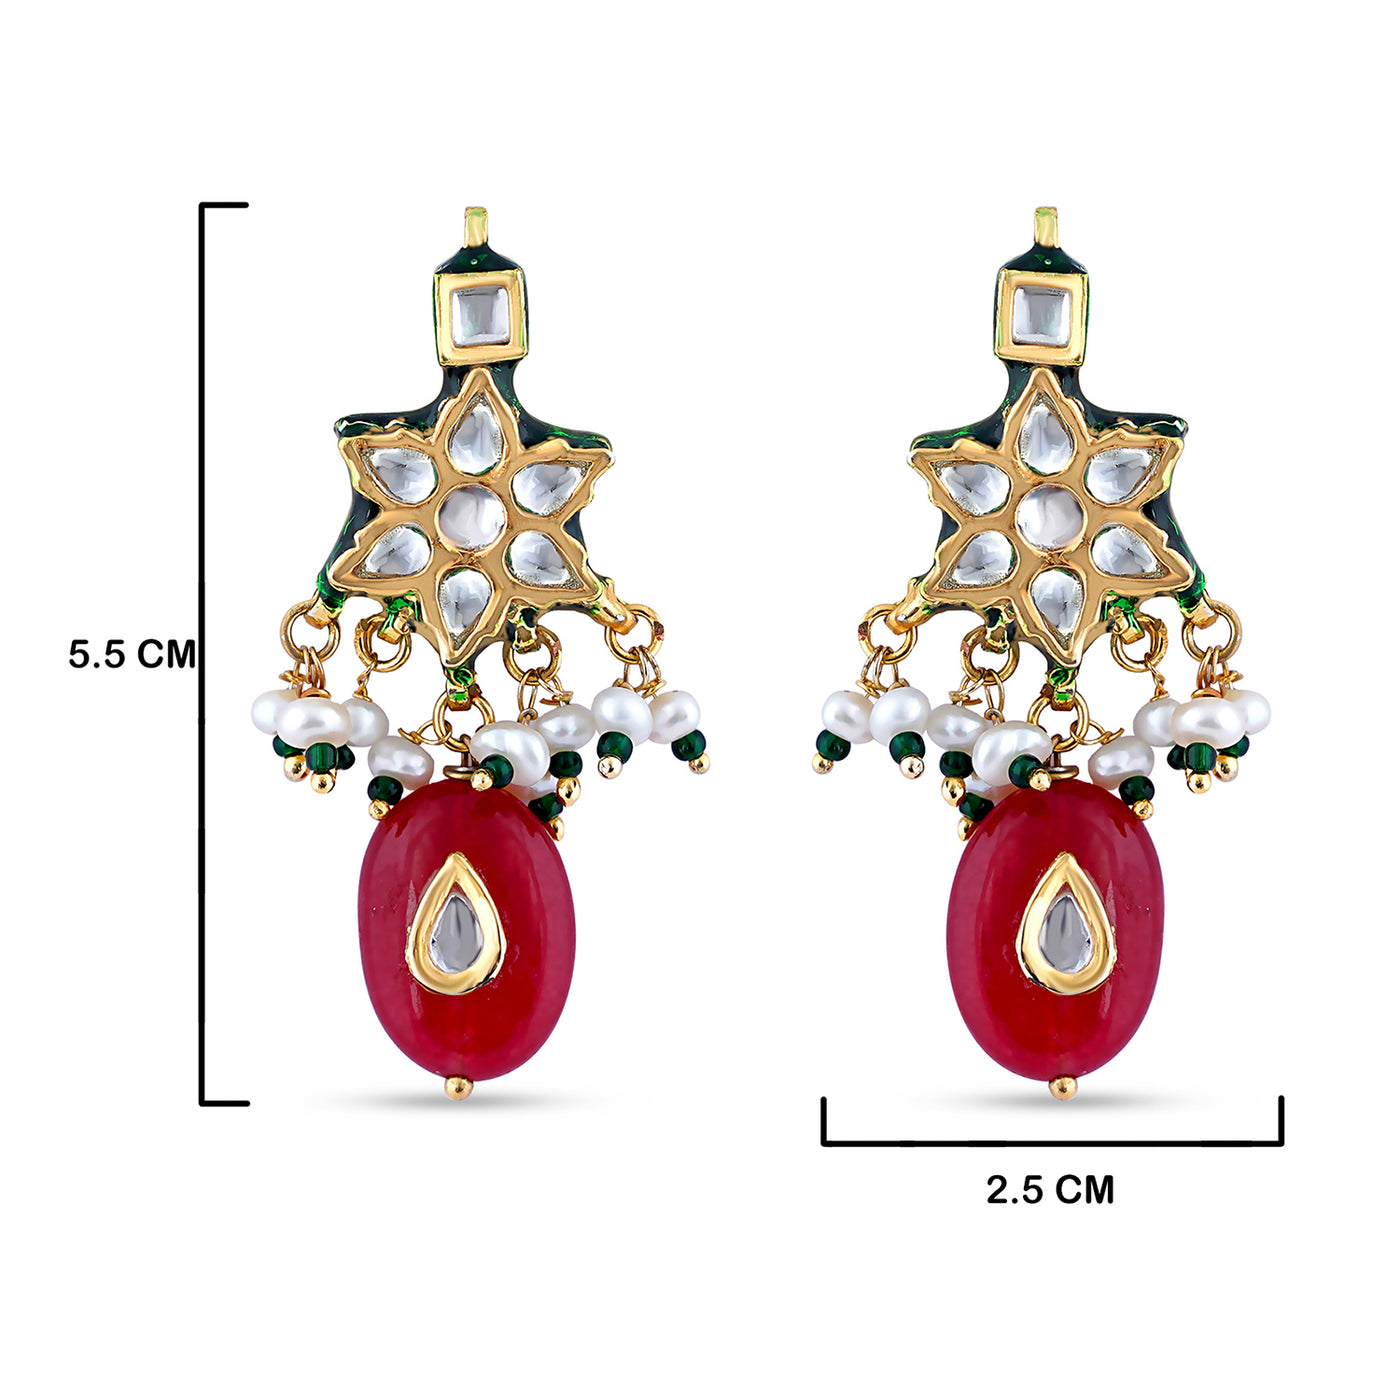 Star Shaped Red Drop Kundan Earrings with Measurements in cm. 5.5cm in height and 2.5cm in length.